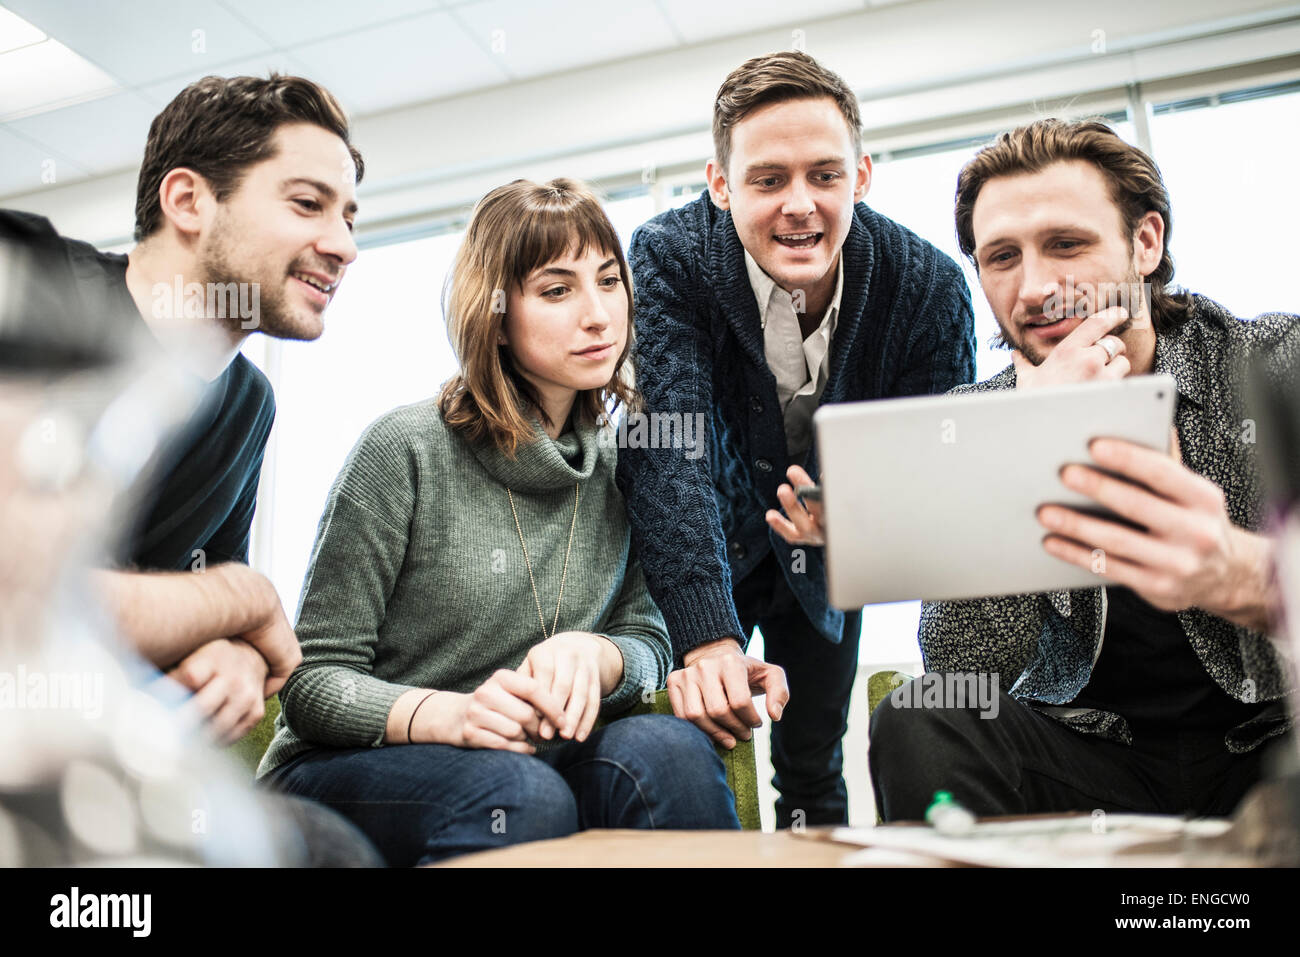 Four people, colleagues at a meeting, and one man sharing a tablet with the group. Stock Photo